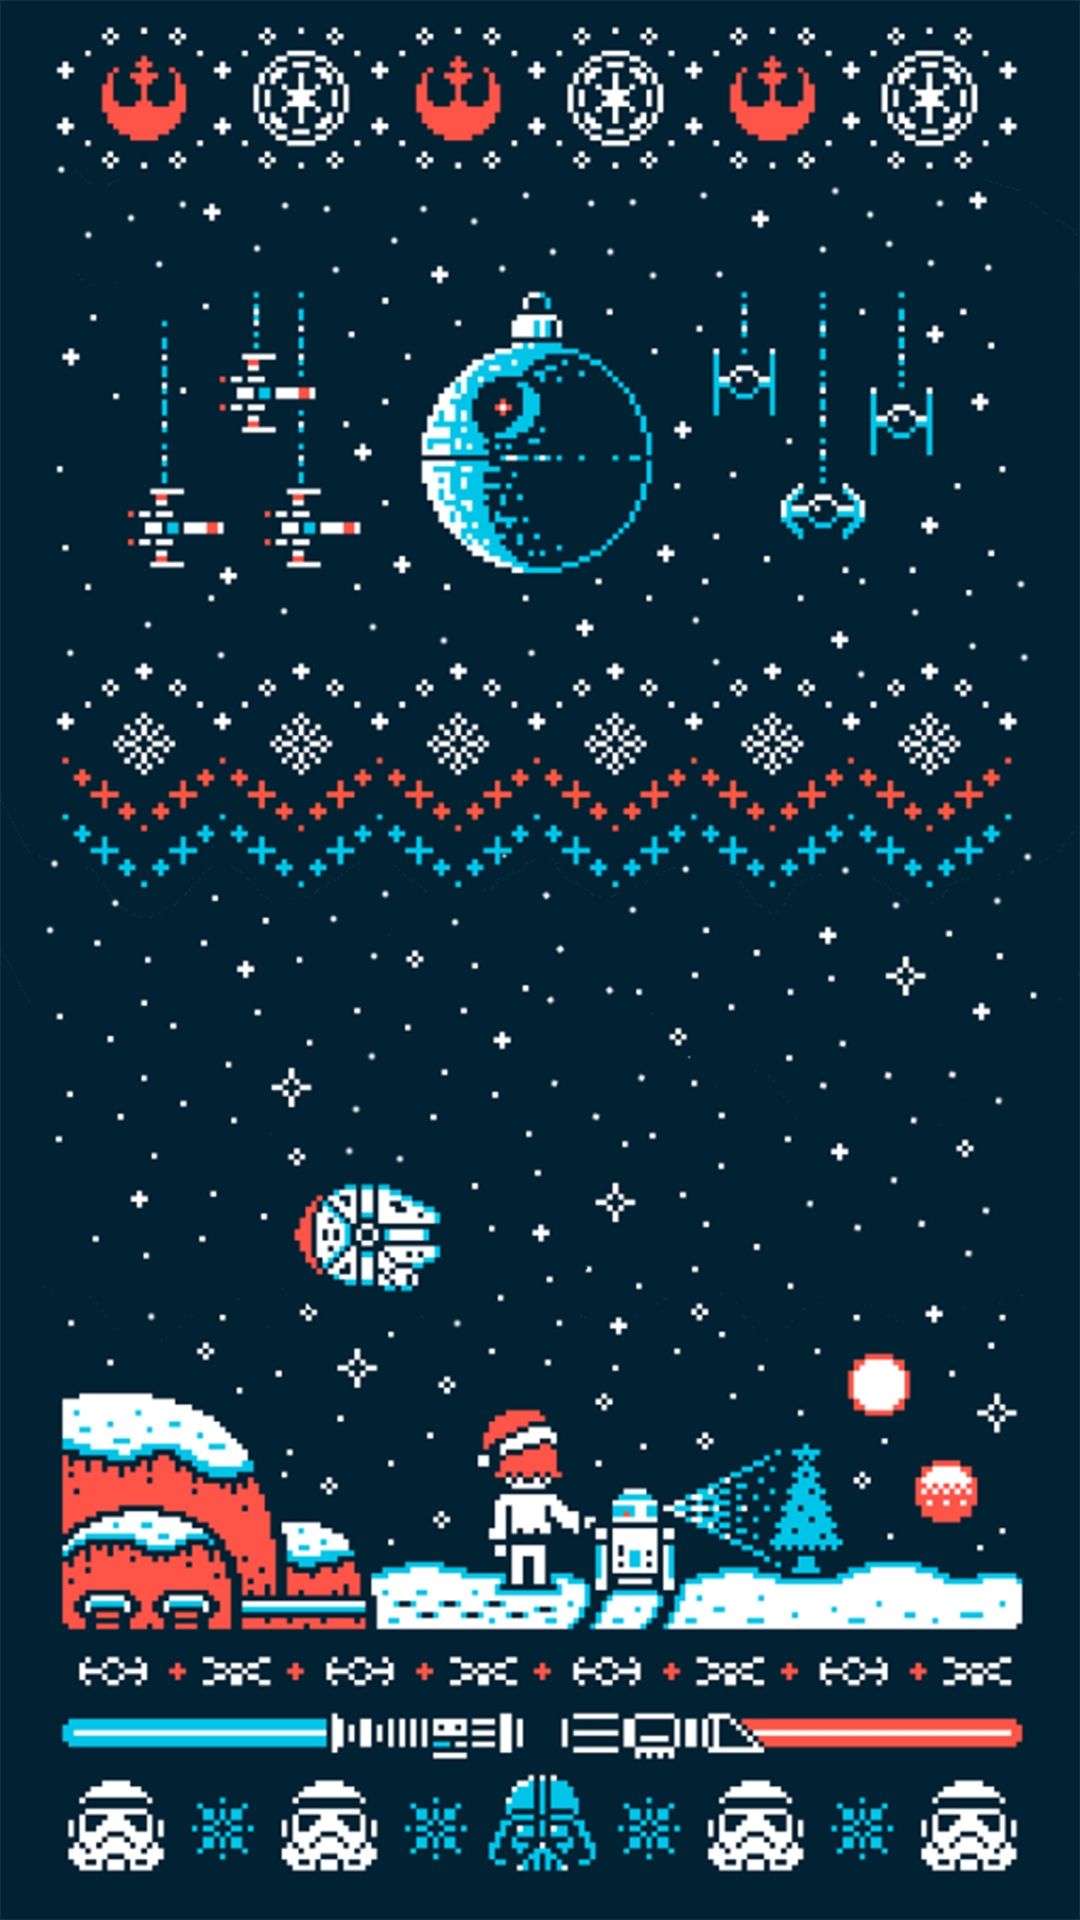 1080x1920 Free Christmas Wallpaper for iPhone - Cute and Vintage Background on WallpaperBat